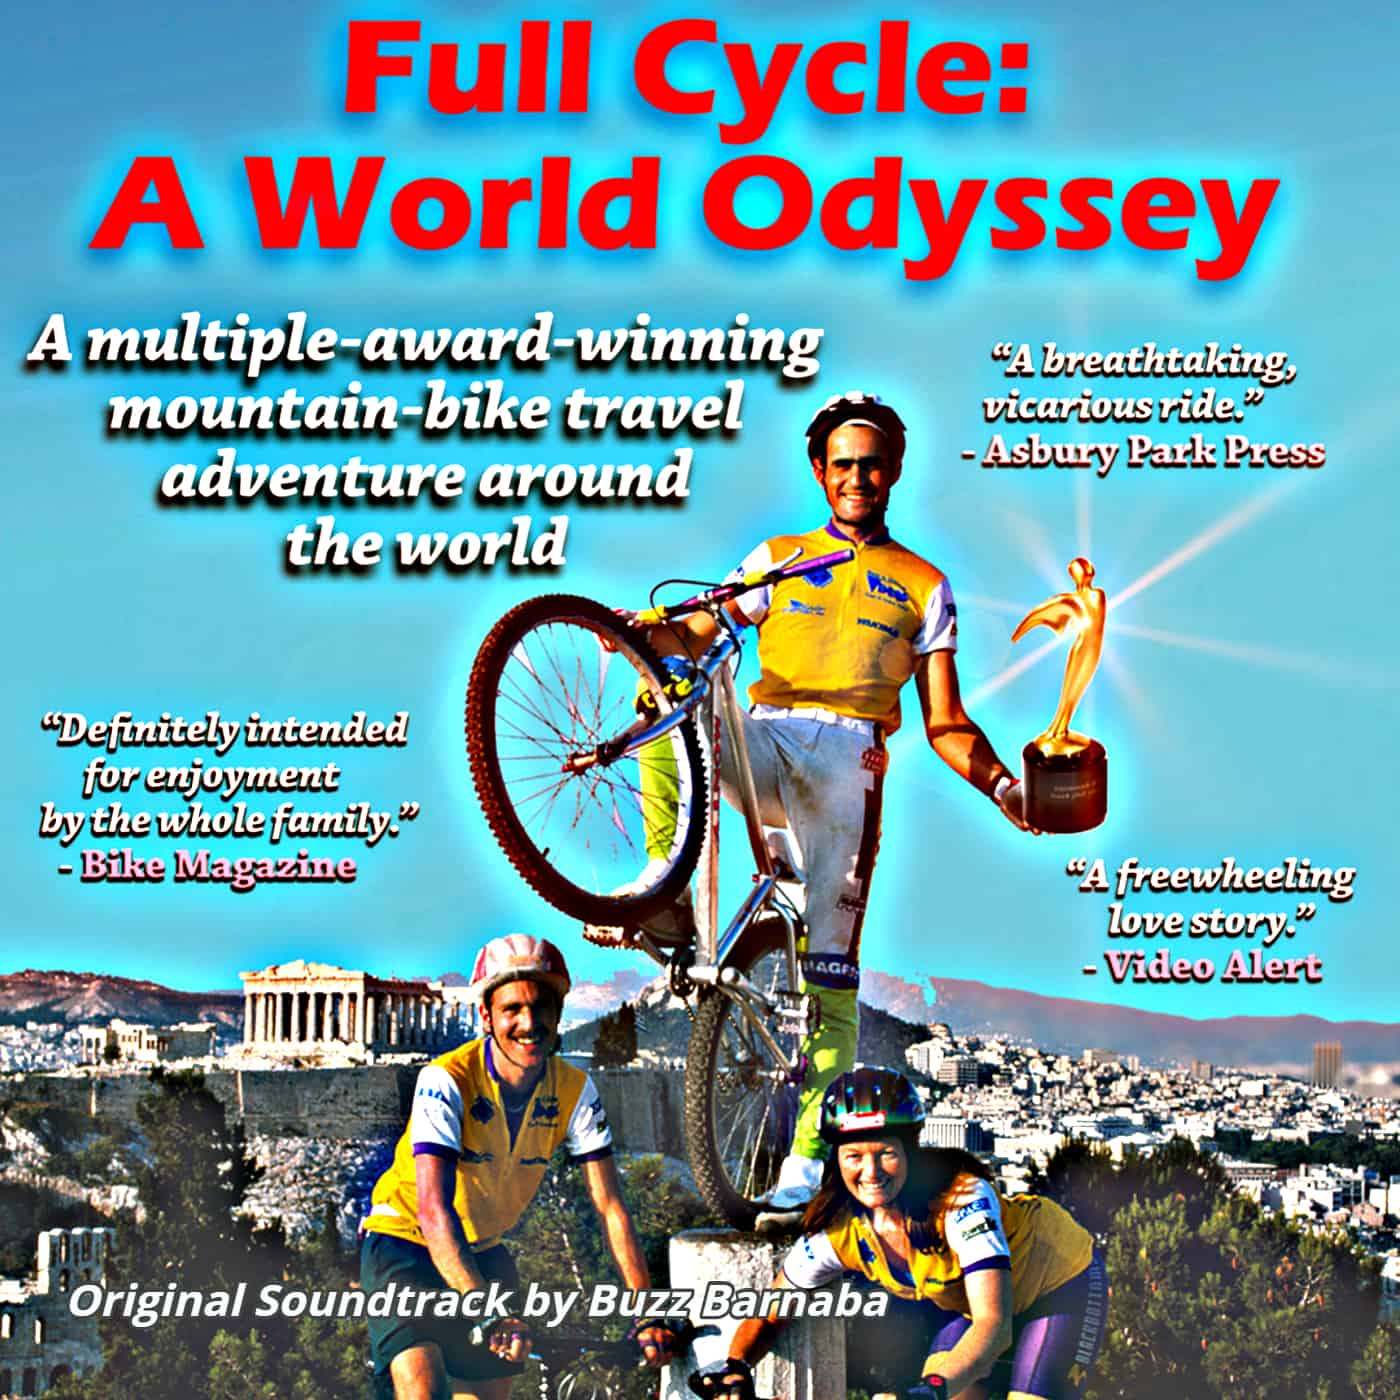 Full Cycle A World Odyssey Original Soundtrack by Anthony Buzz Barnaba at Bandcamp